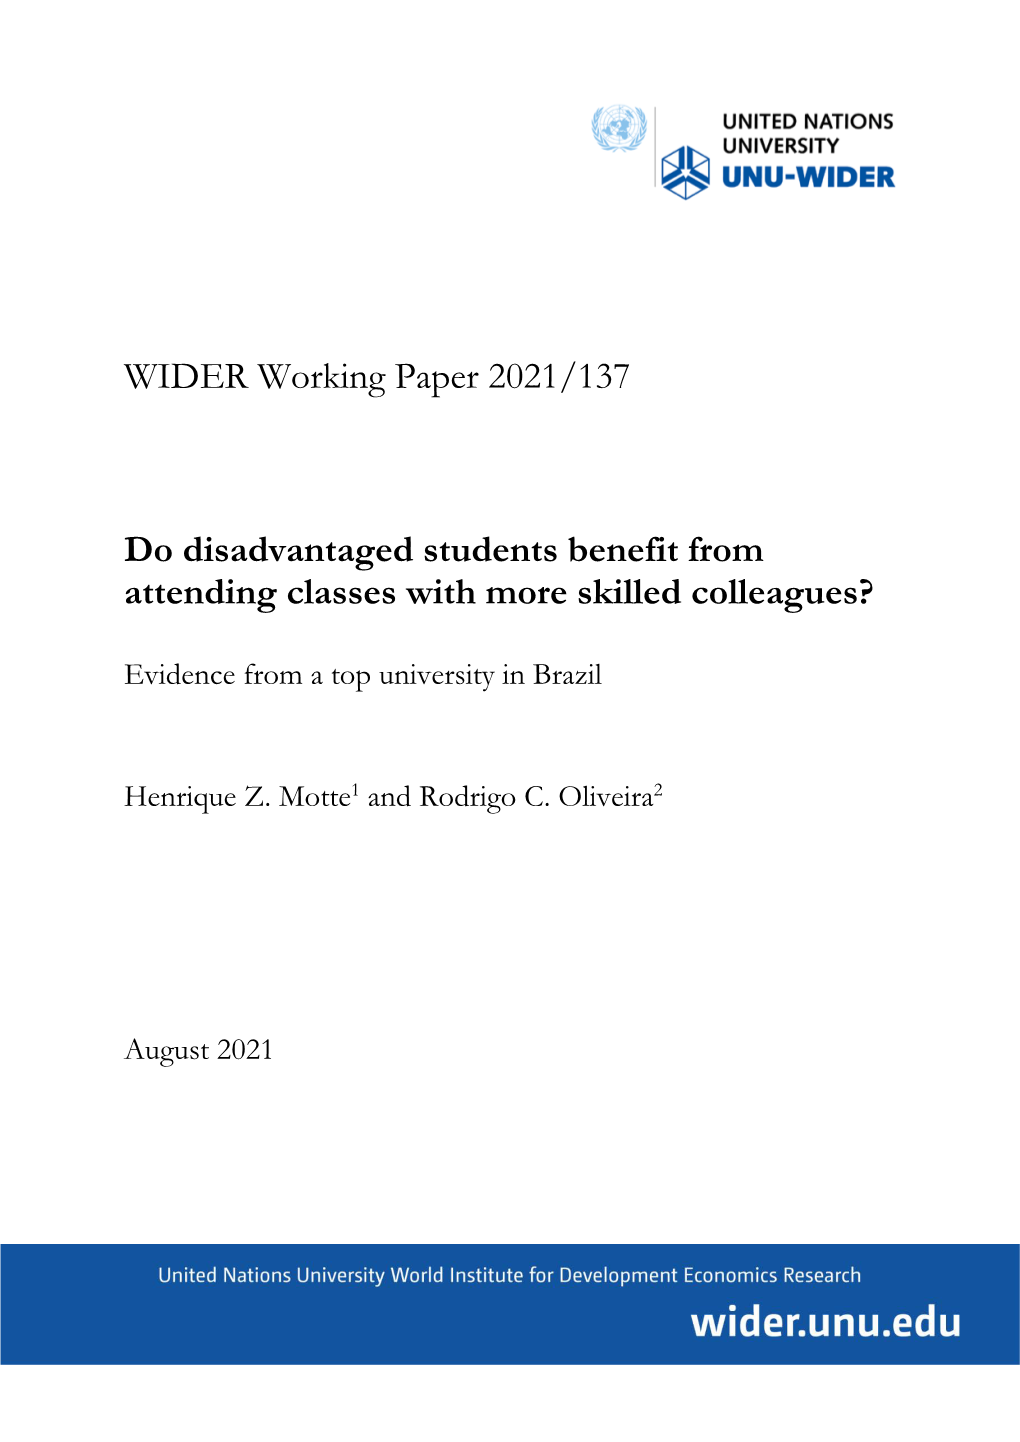 WIDER Working Paper 2021/137-Do Disadvantaged Students Benefit